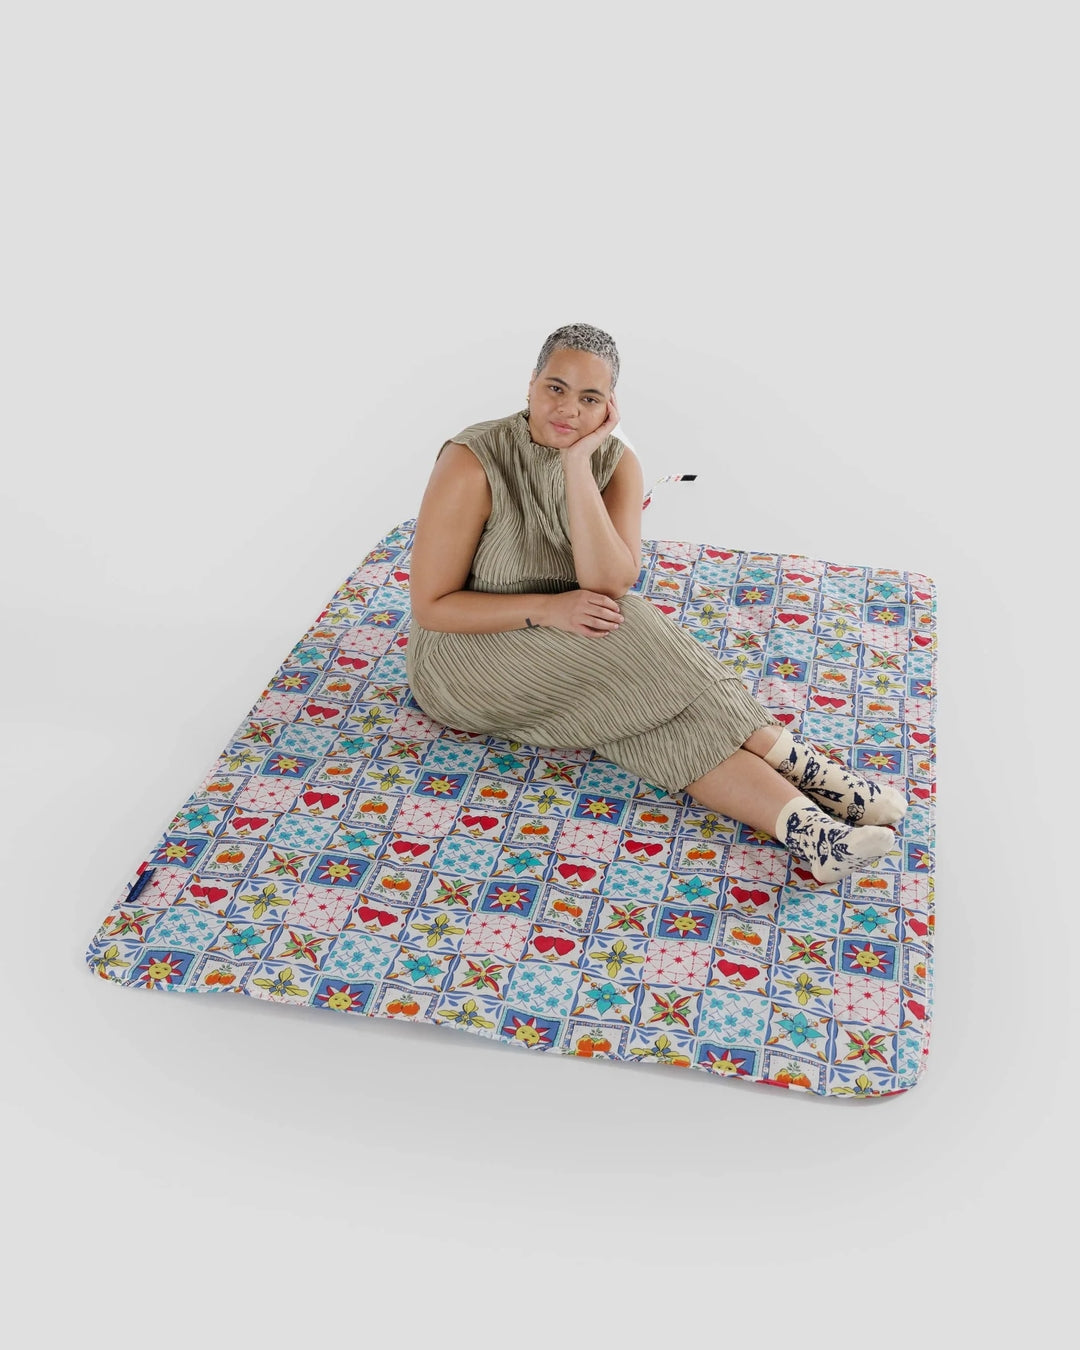 Puffy Picnic Blanket - Vacation Tile [PRE ORDER]